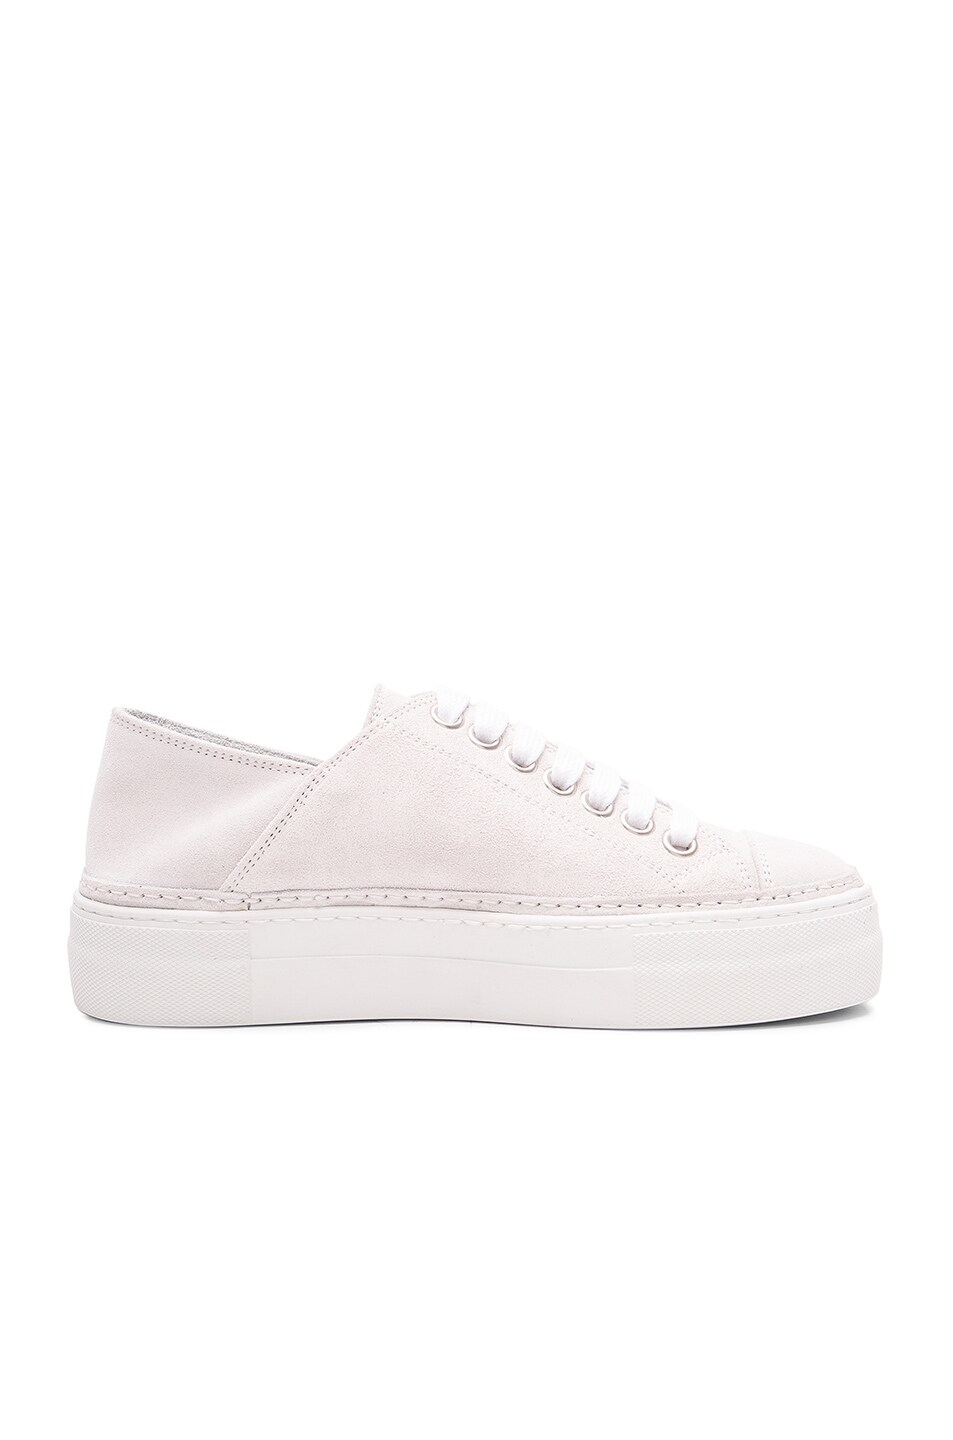 Image 1 of Ann Demeulemeester Suede Low Top Sneakers in White